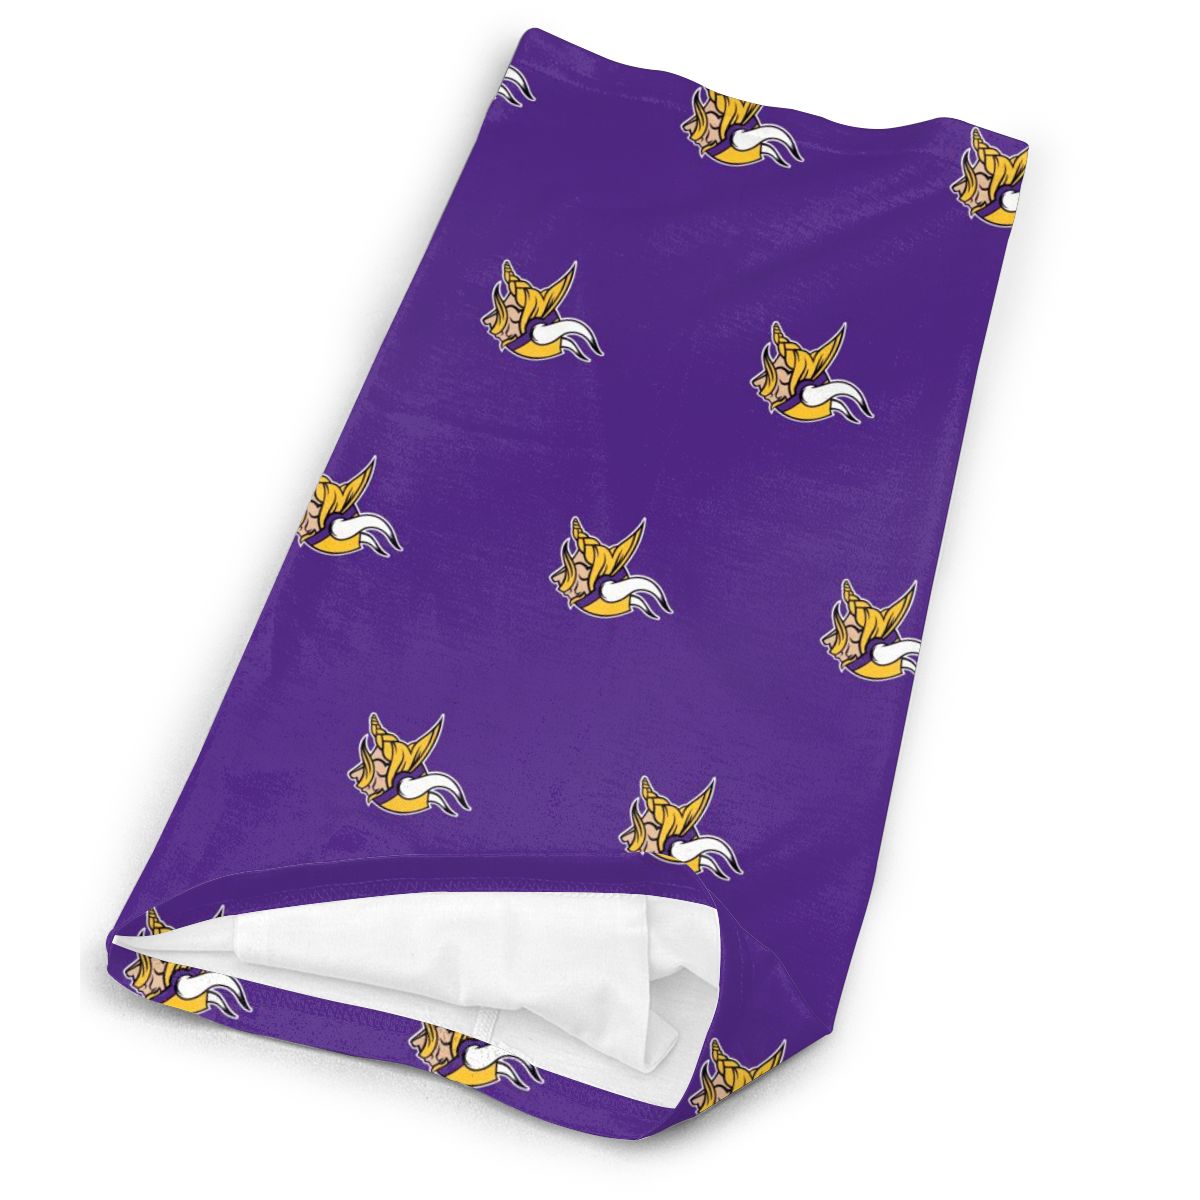 Reusble Mouth Cover Bandanas Minnesota Vikings Variety Head Scarf Face Mask With PM 2.5 Filter